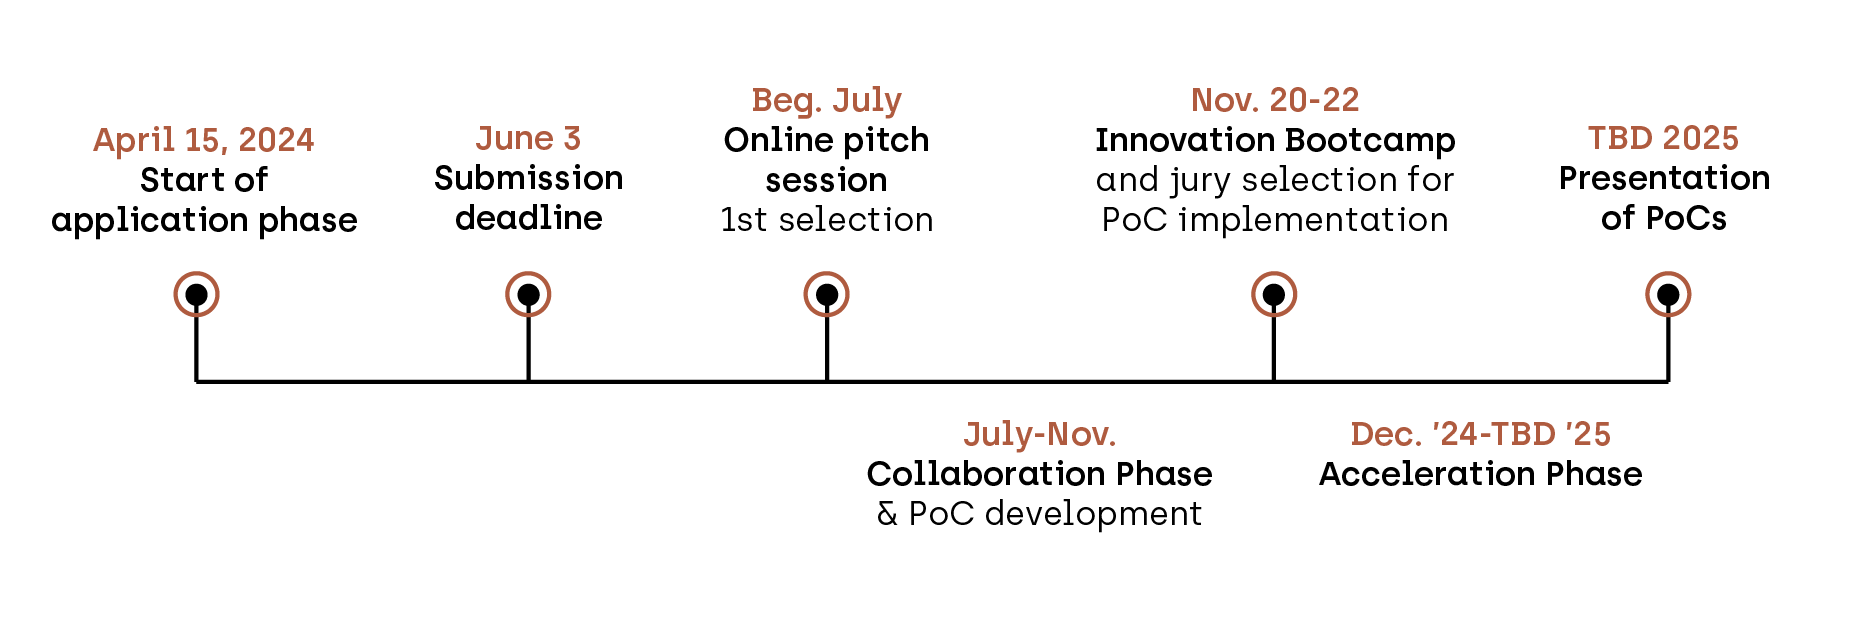 Black line with black and red circles for key dates.